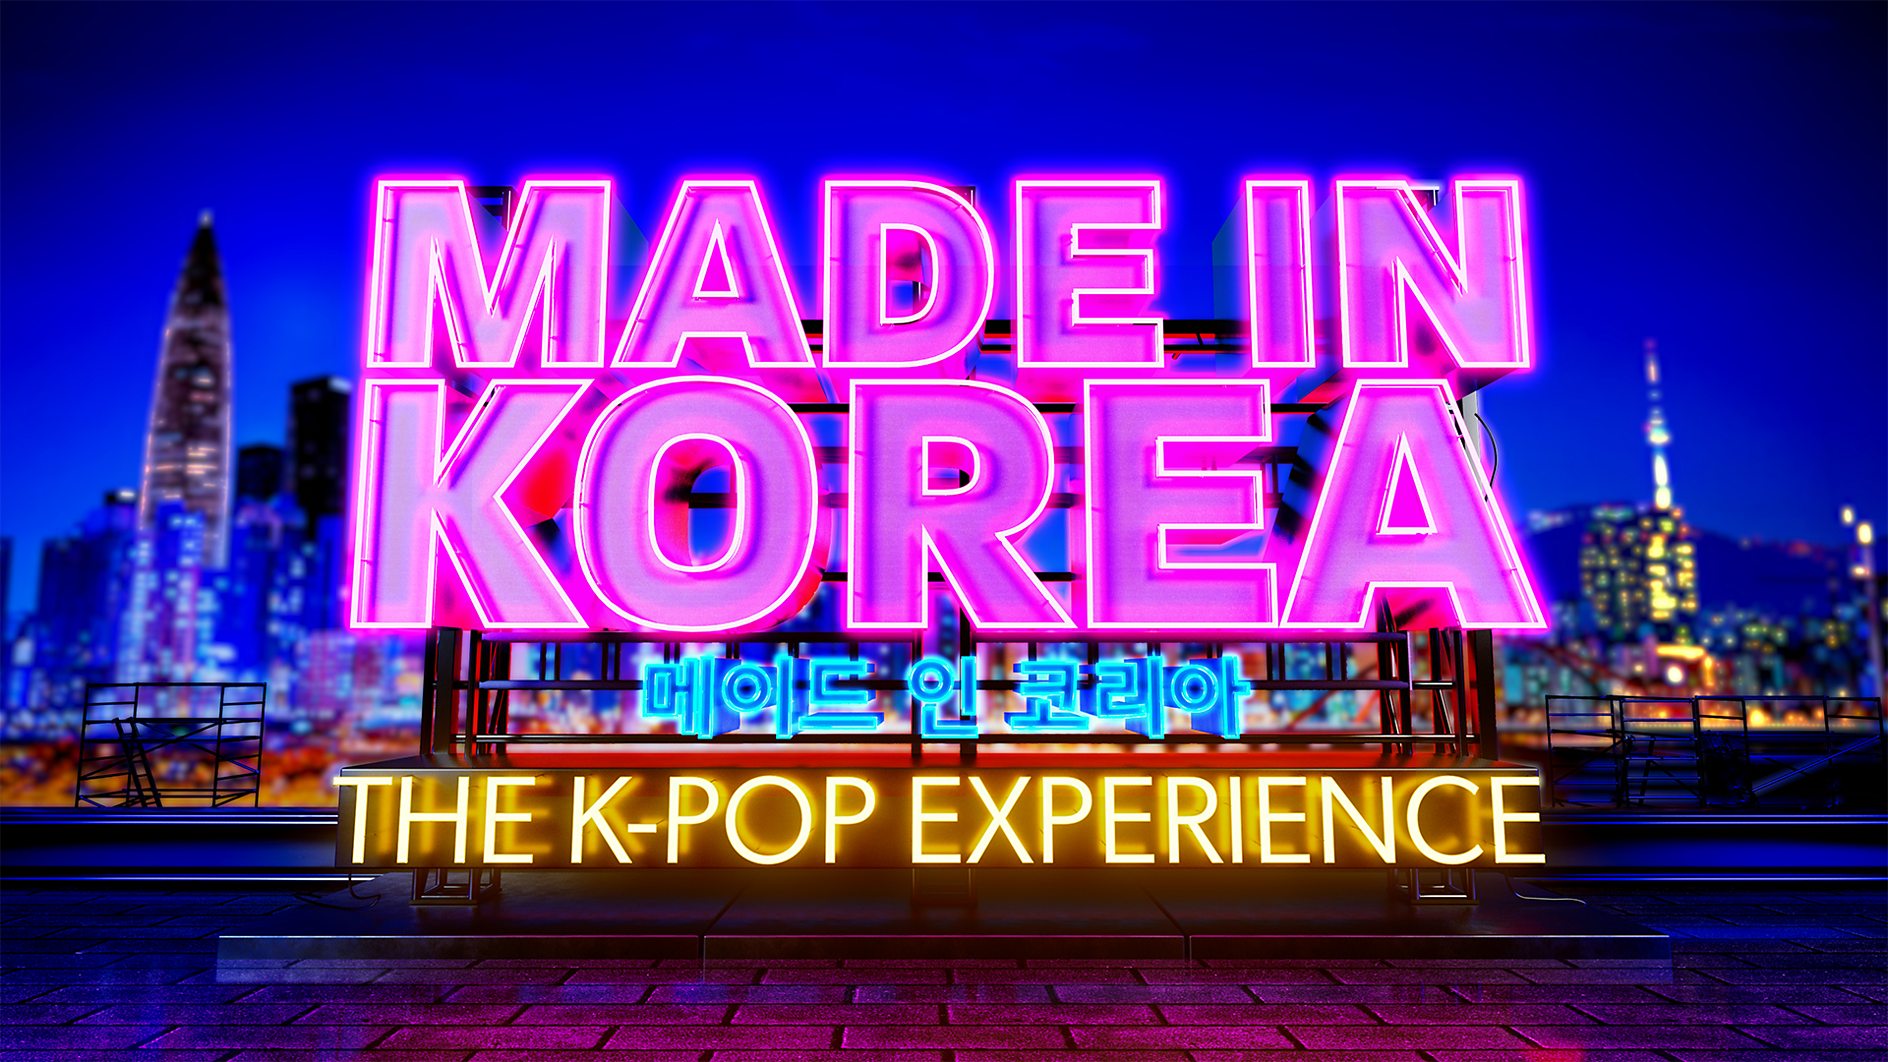 BBC acquires new entertainment series Made in Korea: The K-Pop Experience for BBC One & BBC iPlayer